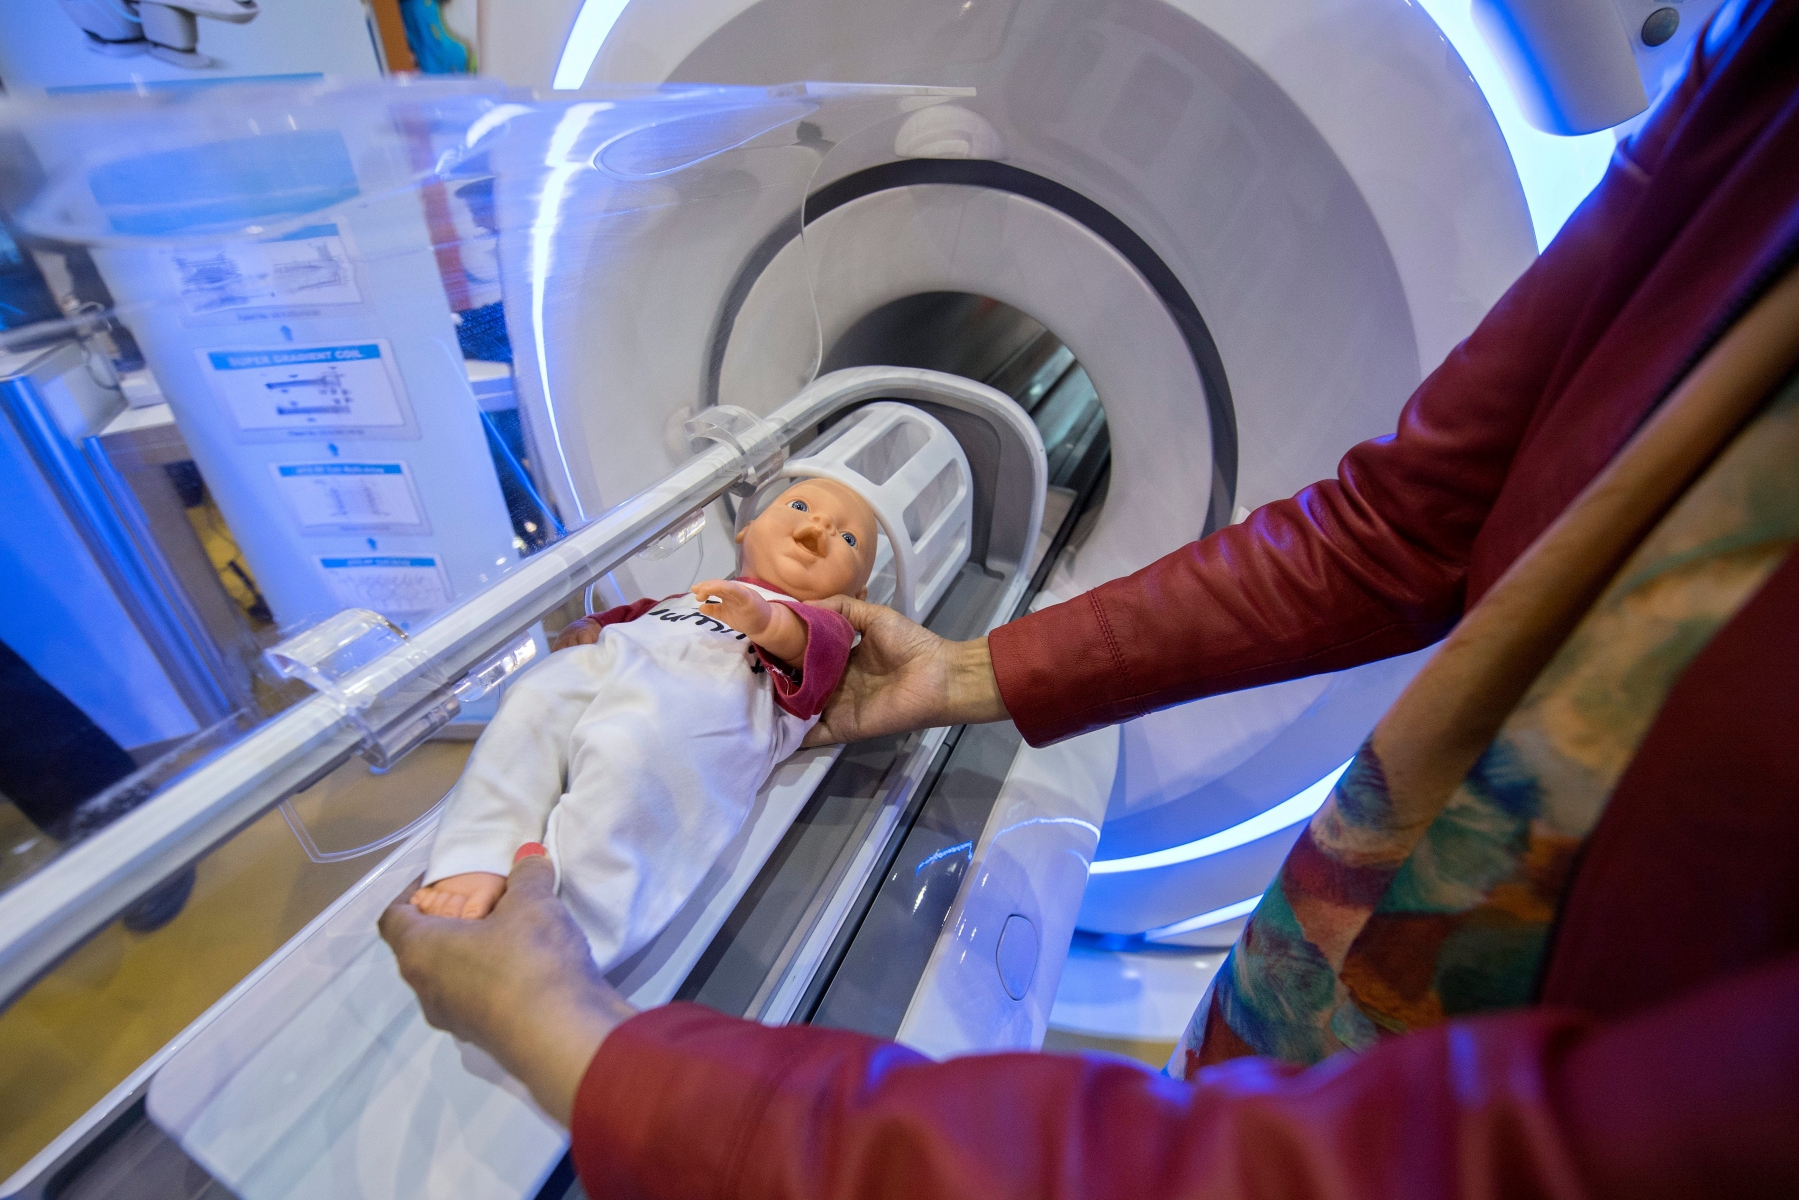 A person of China presents an invention called Neona, at the 44th International Exhibition of Inventions, New Techniques and Products, in Geneva, Switzerland, Wednesday, April 13, 2016. Neona is the world-first 1.5T dedicated neonatal MRI system that can be installed directly in neonatal intensive care units. 700 exhibitors from around the world are presenting around 1000 products hoping to catch the eye at the 44th International Exhibition of Inventions, which runs from 13 to 17 April 2016. (KEYSTONE/Martial Trezzini) SWITZERLAND EXHIBITION INVENTIONS GENEVA 2016